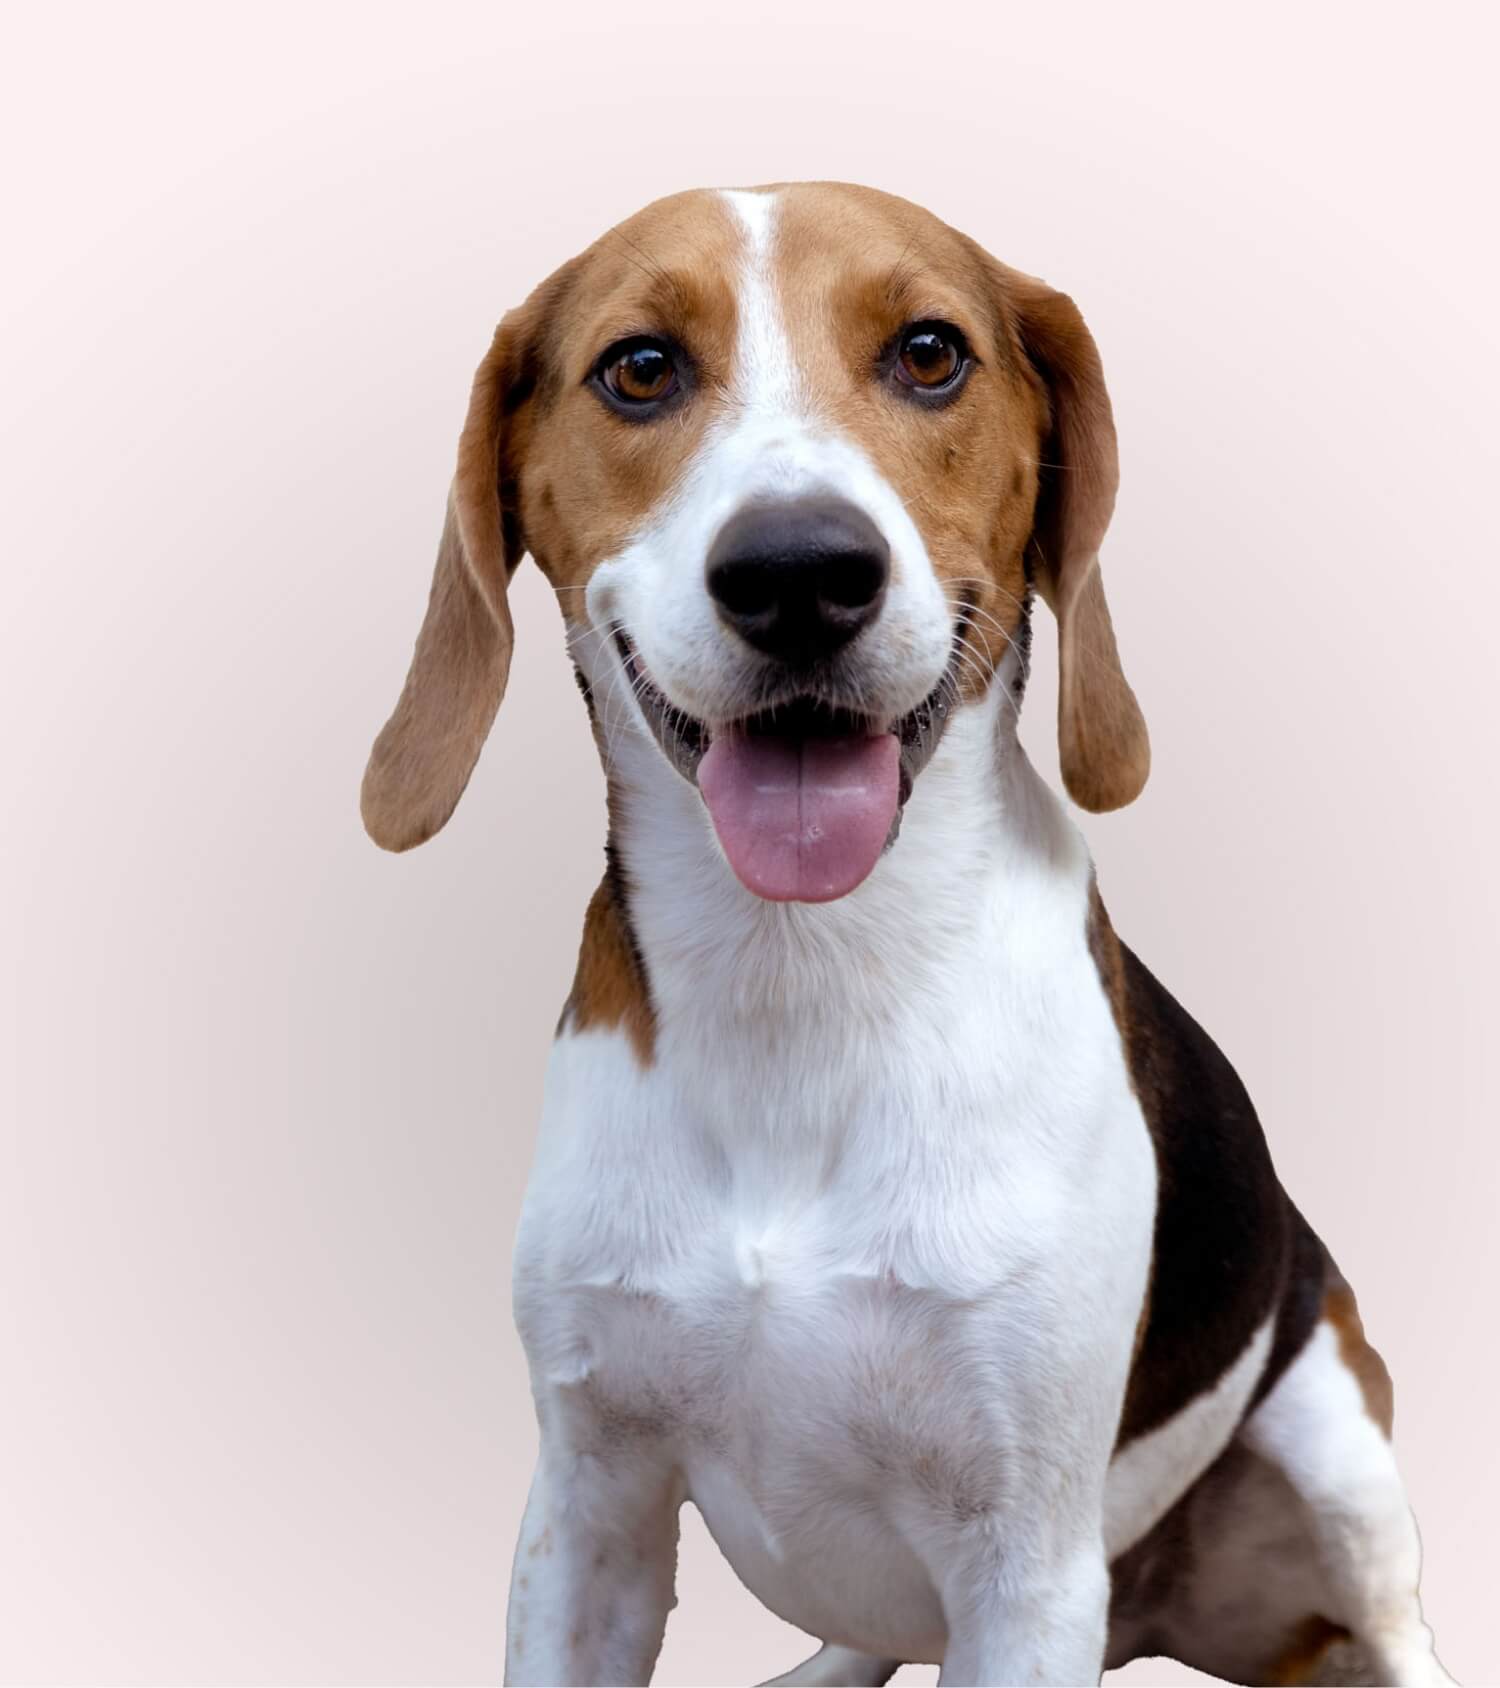 Beagle after using Plume dog grooming products